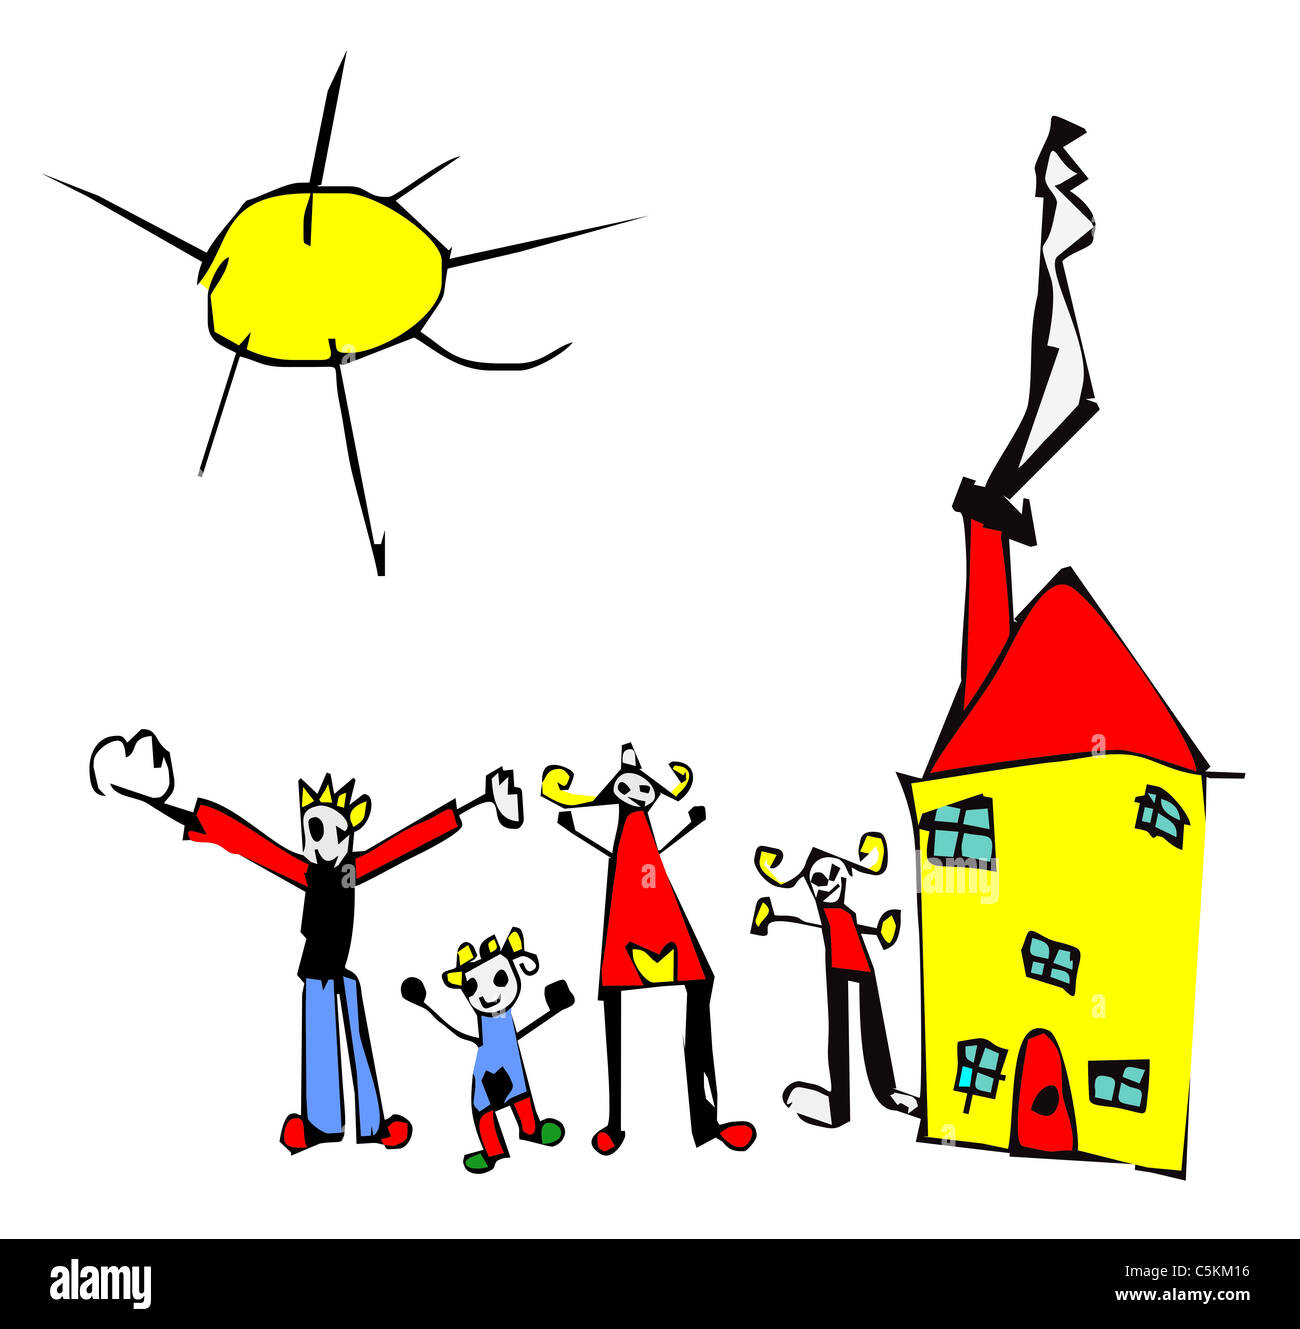 Child hand drawn illustration of a typical happy family of four and their house. Stock Photo